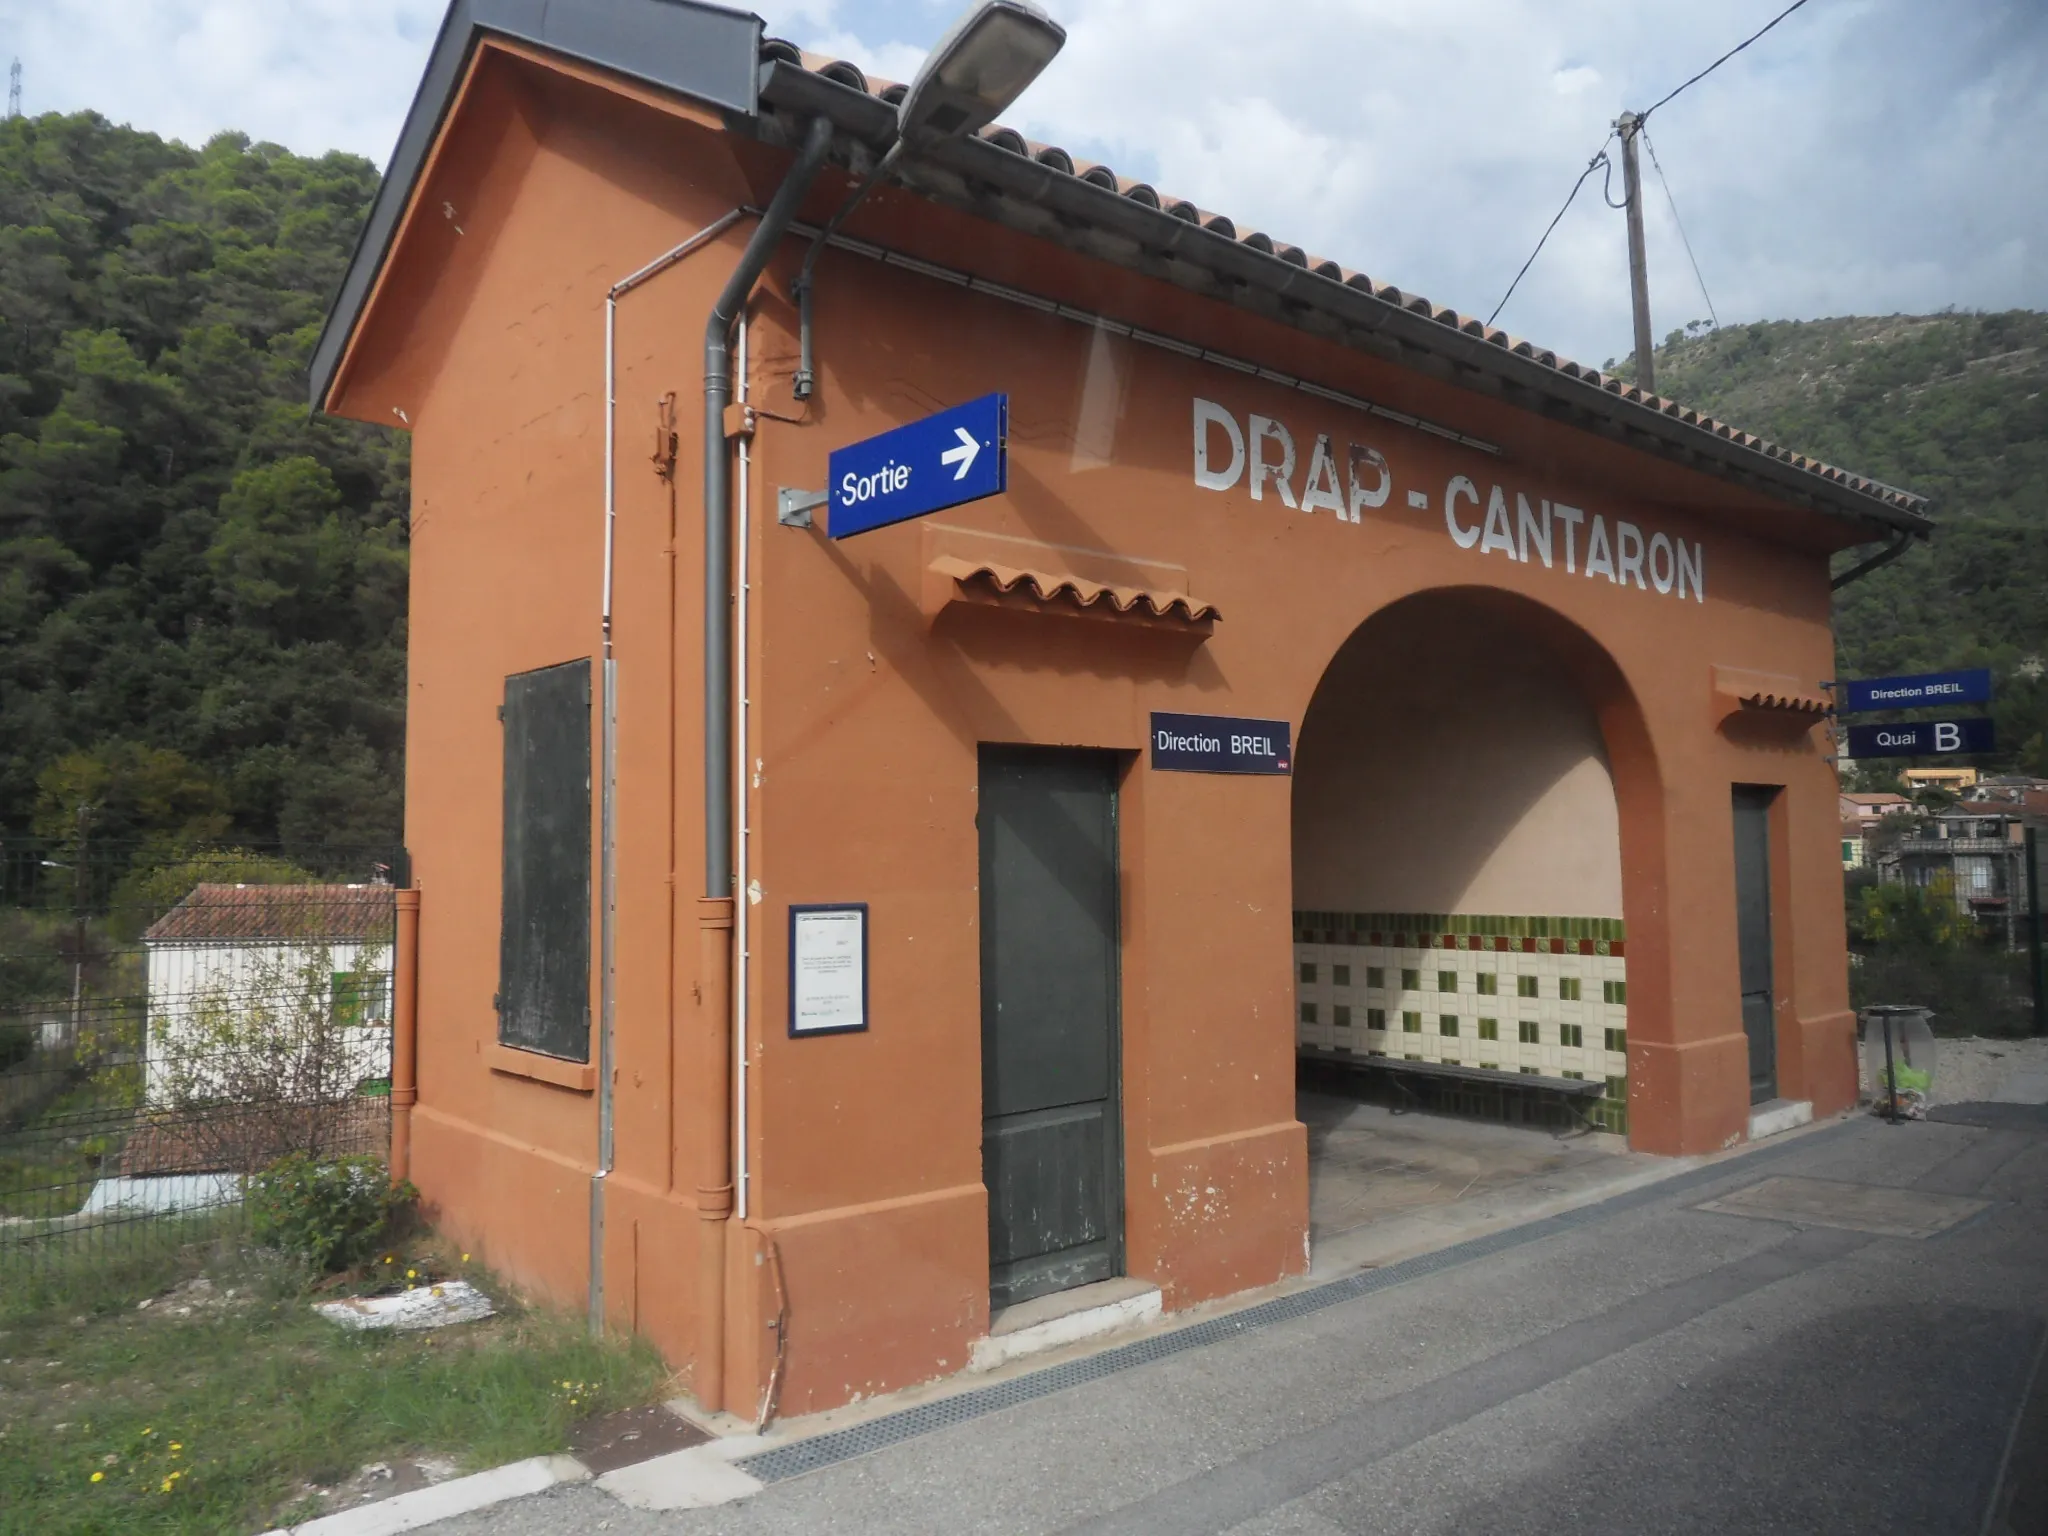 Photo showing: The train station of Drap - Cantaron, France.